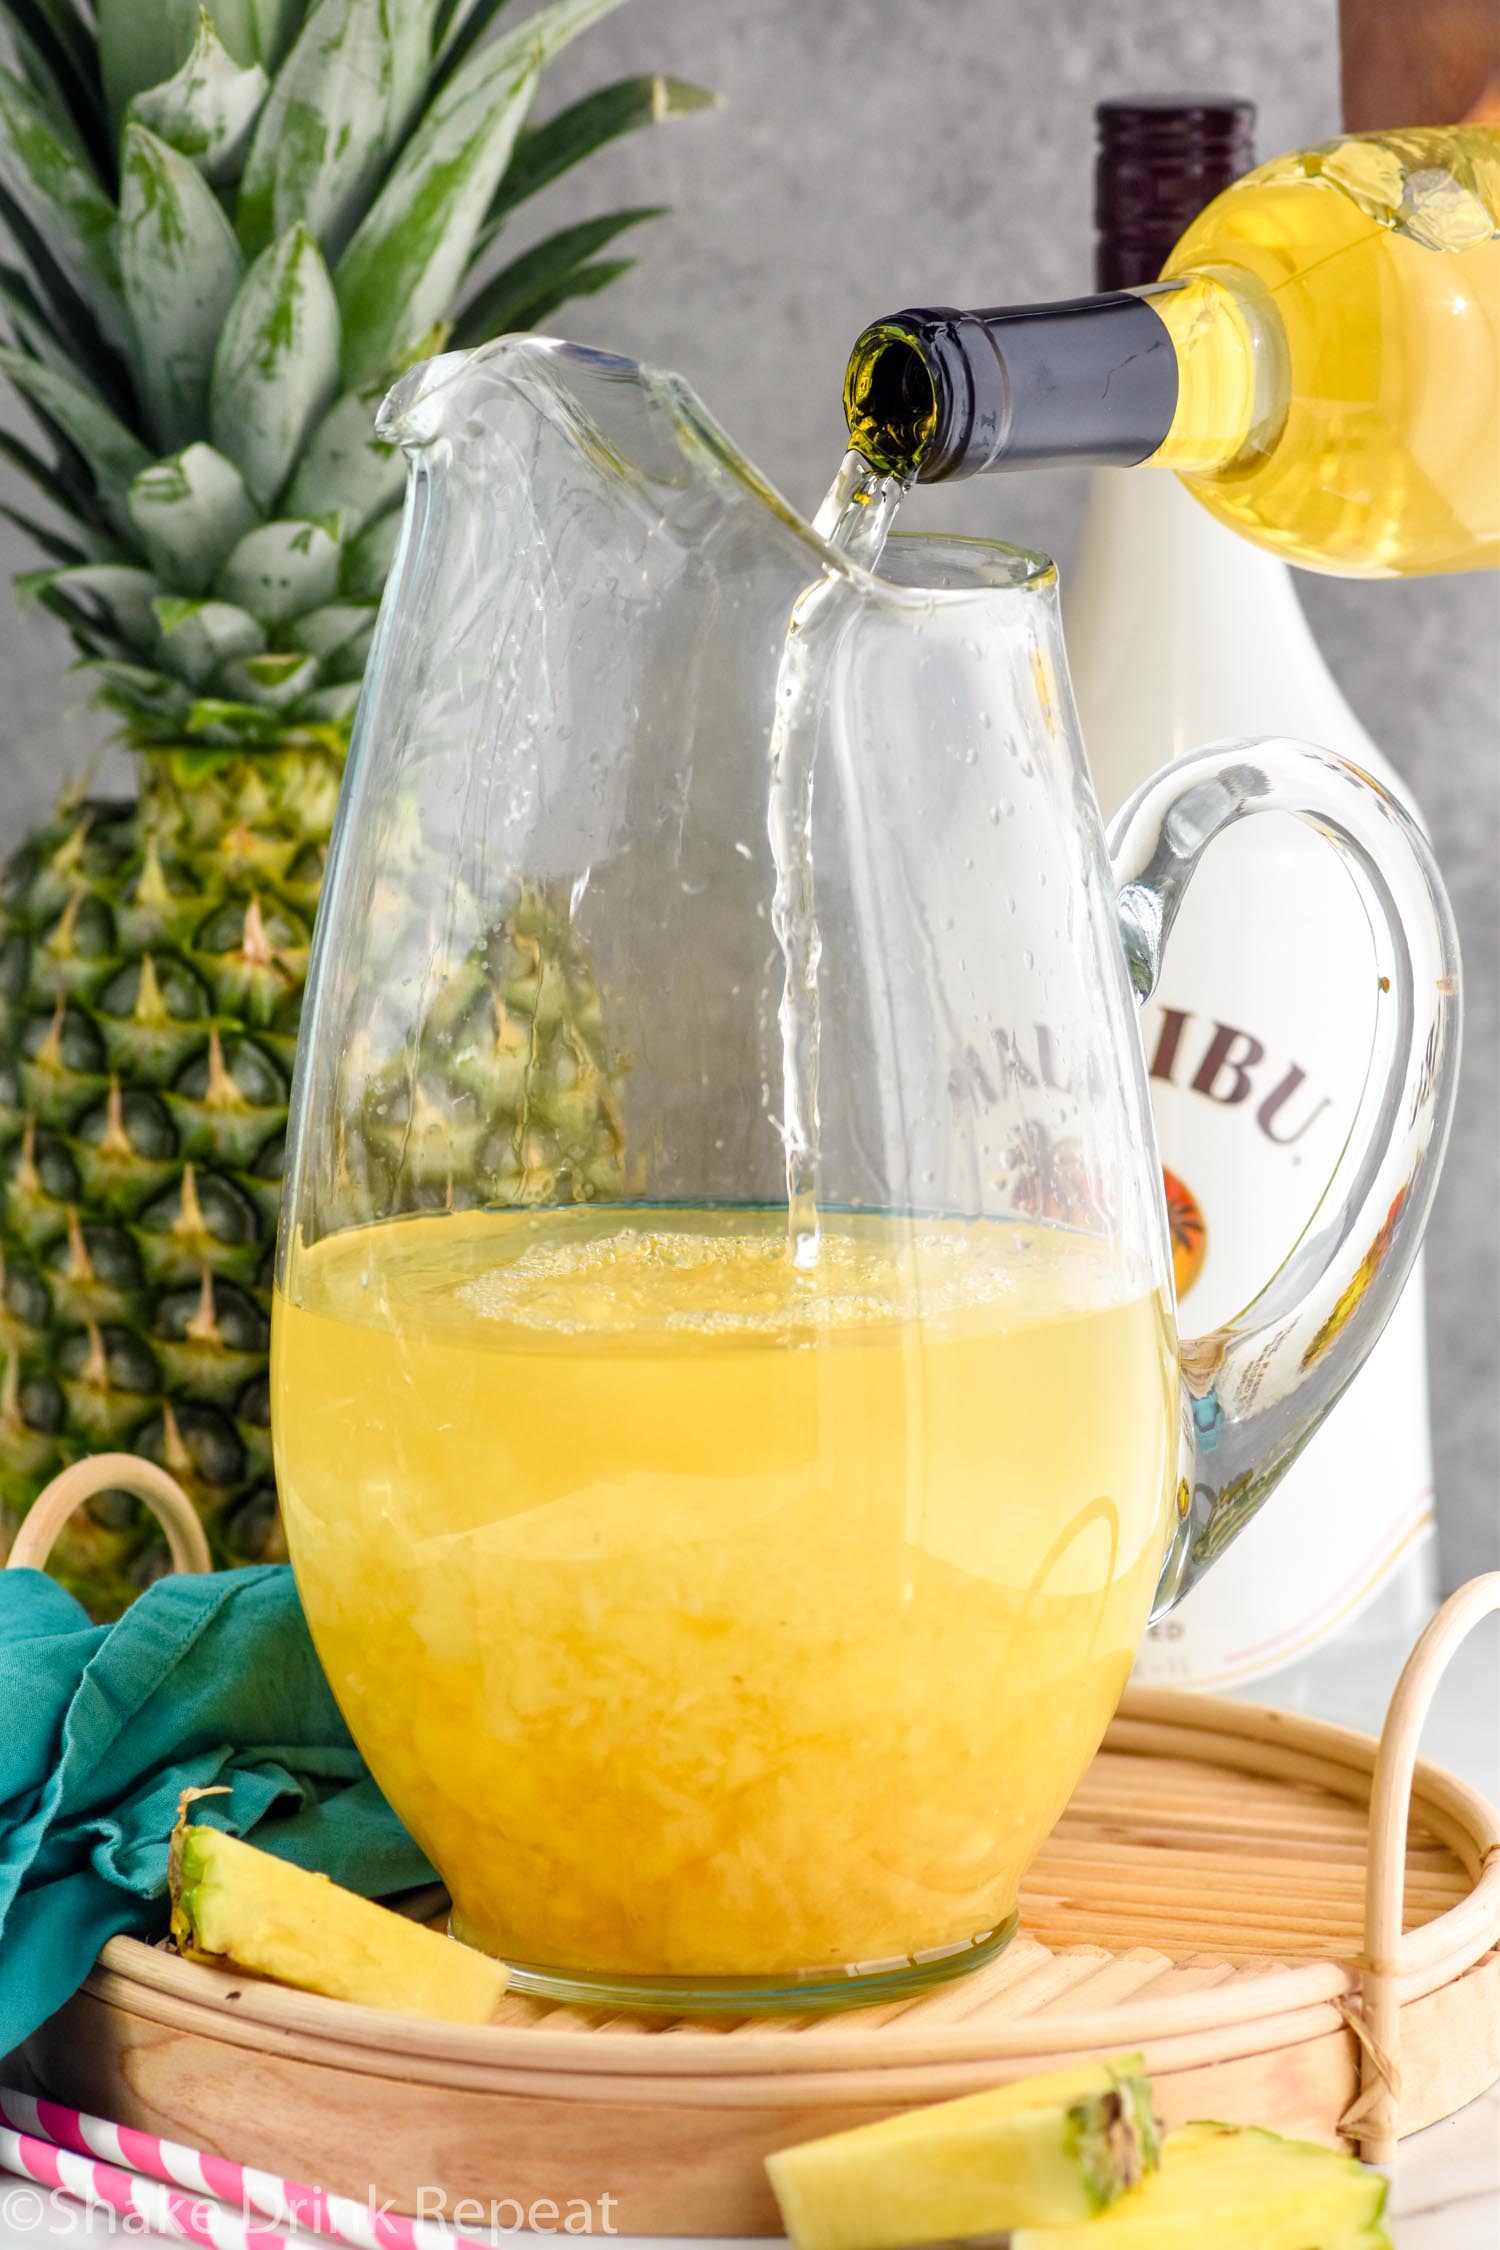 Photo of Moscato wine being poured into a pitcher of ingredients for Pina Colada Sangria recipe. Bottle of Malibu rum and a pineapple in the background.